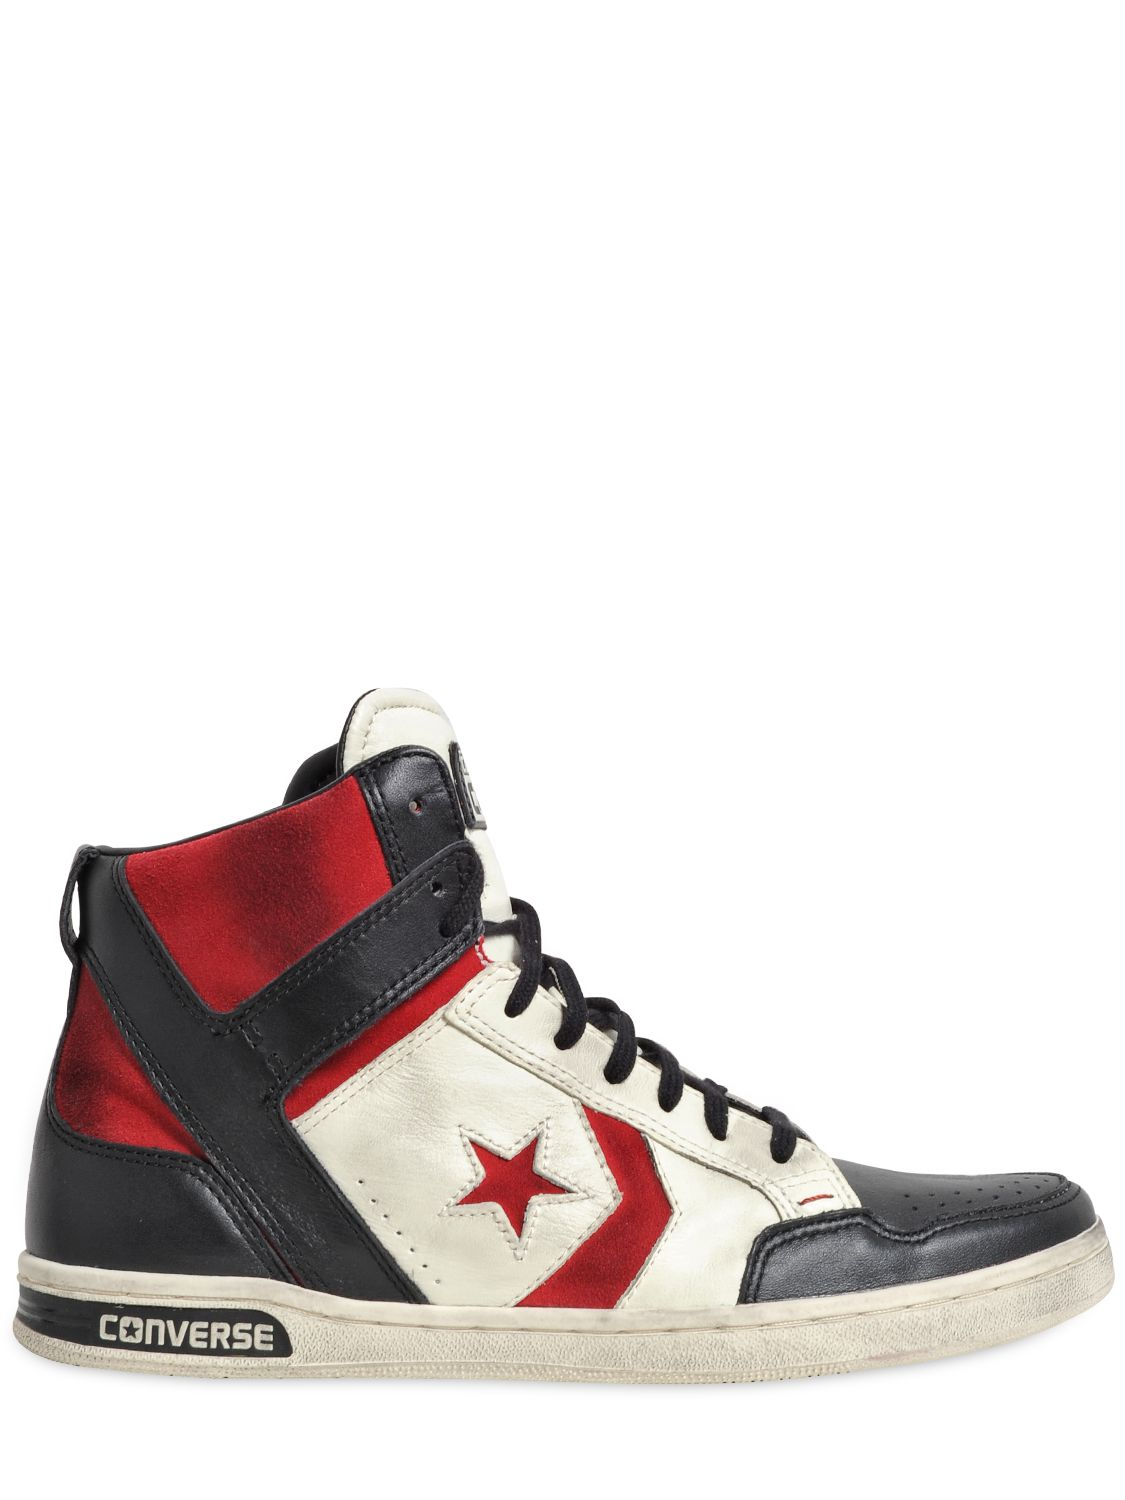 converse weapon high top